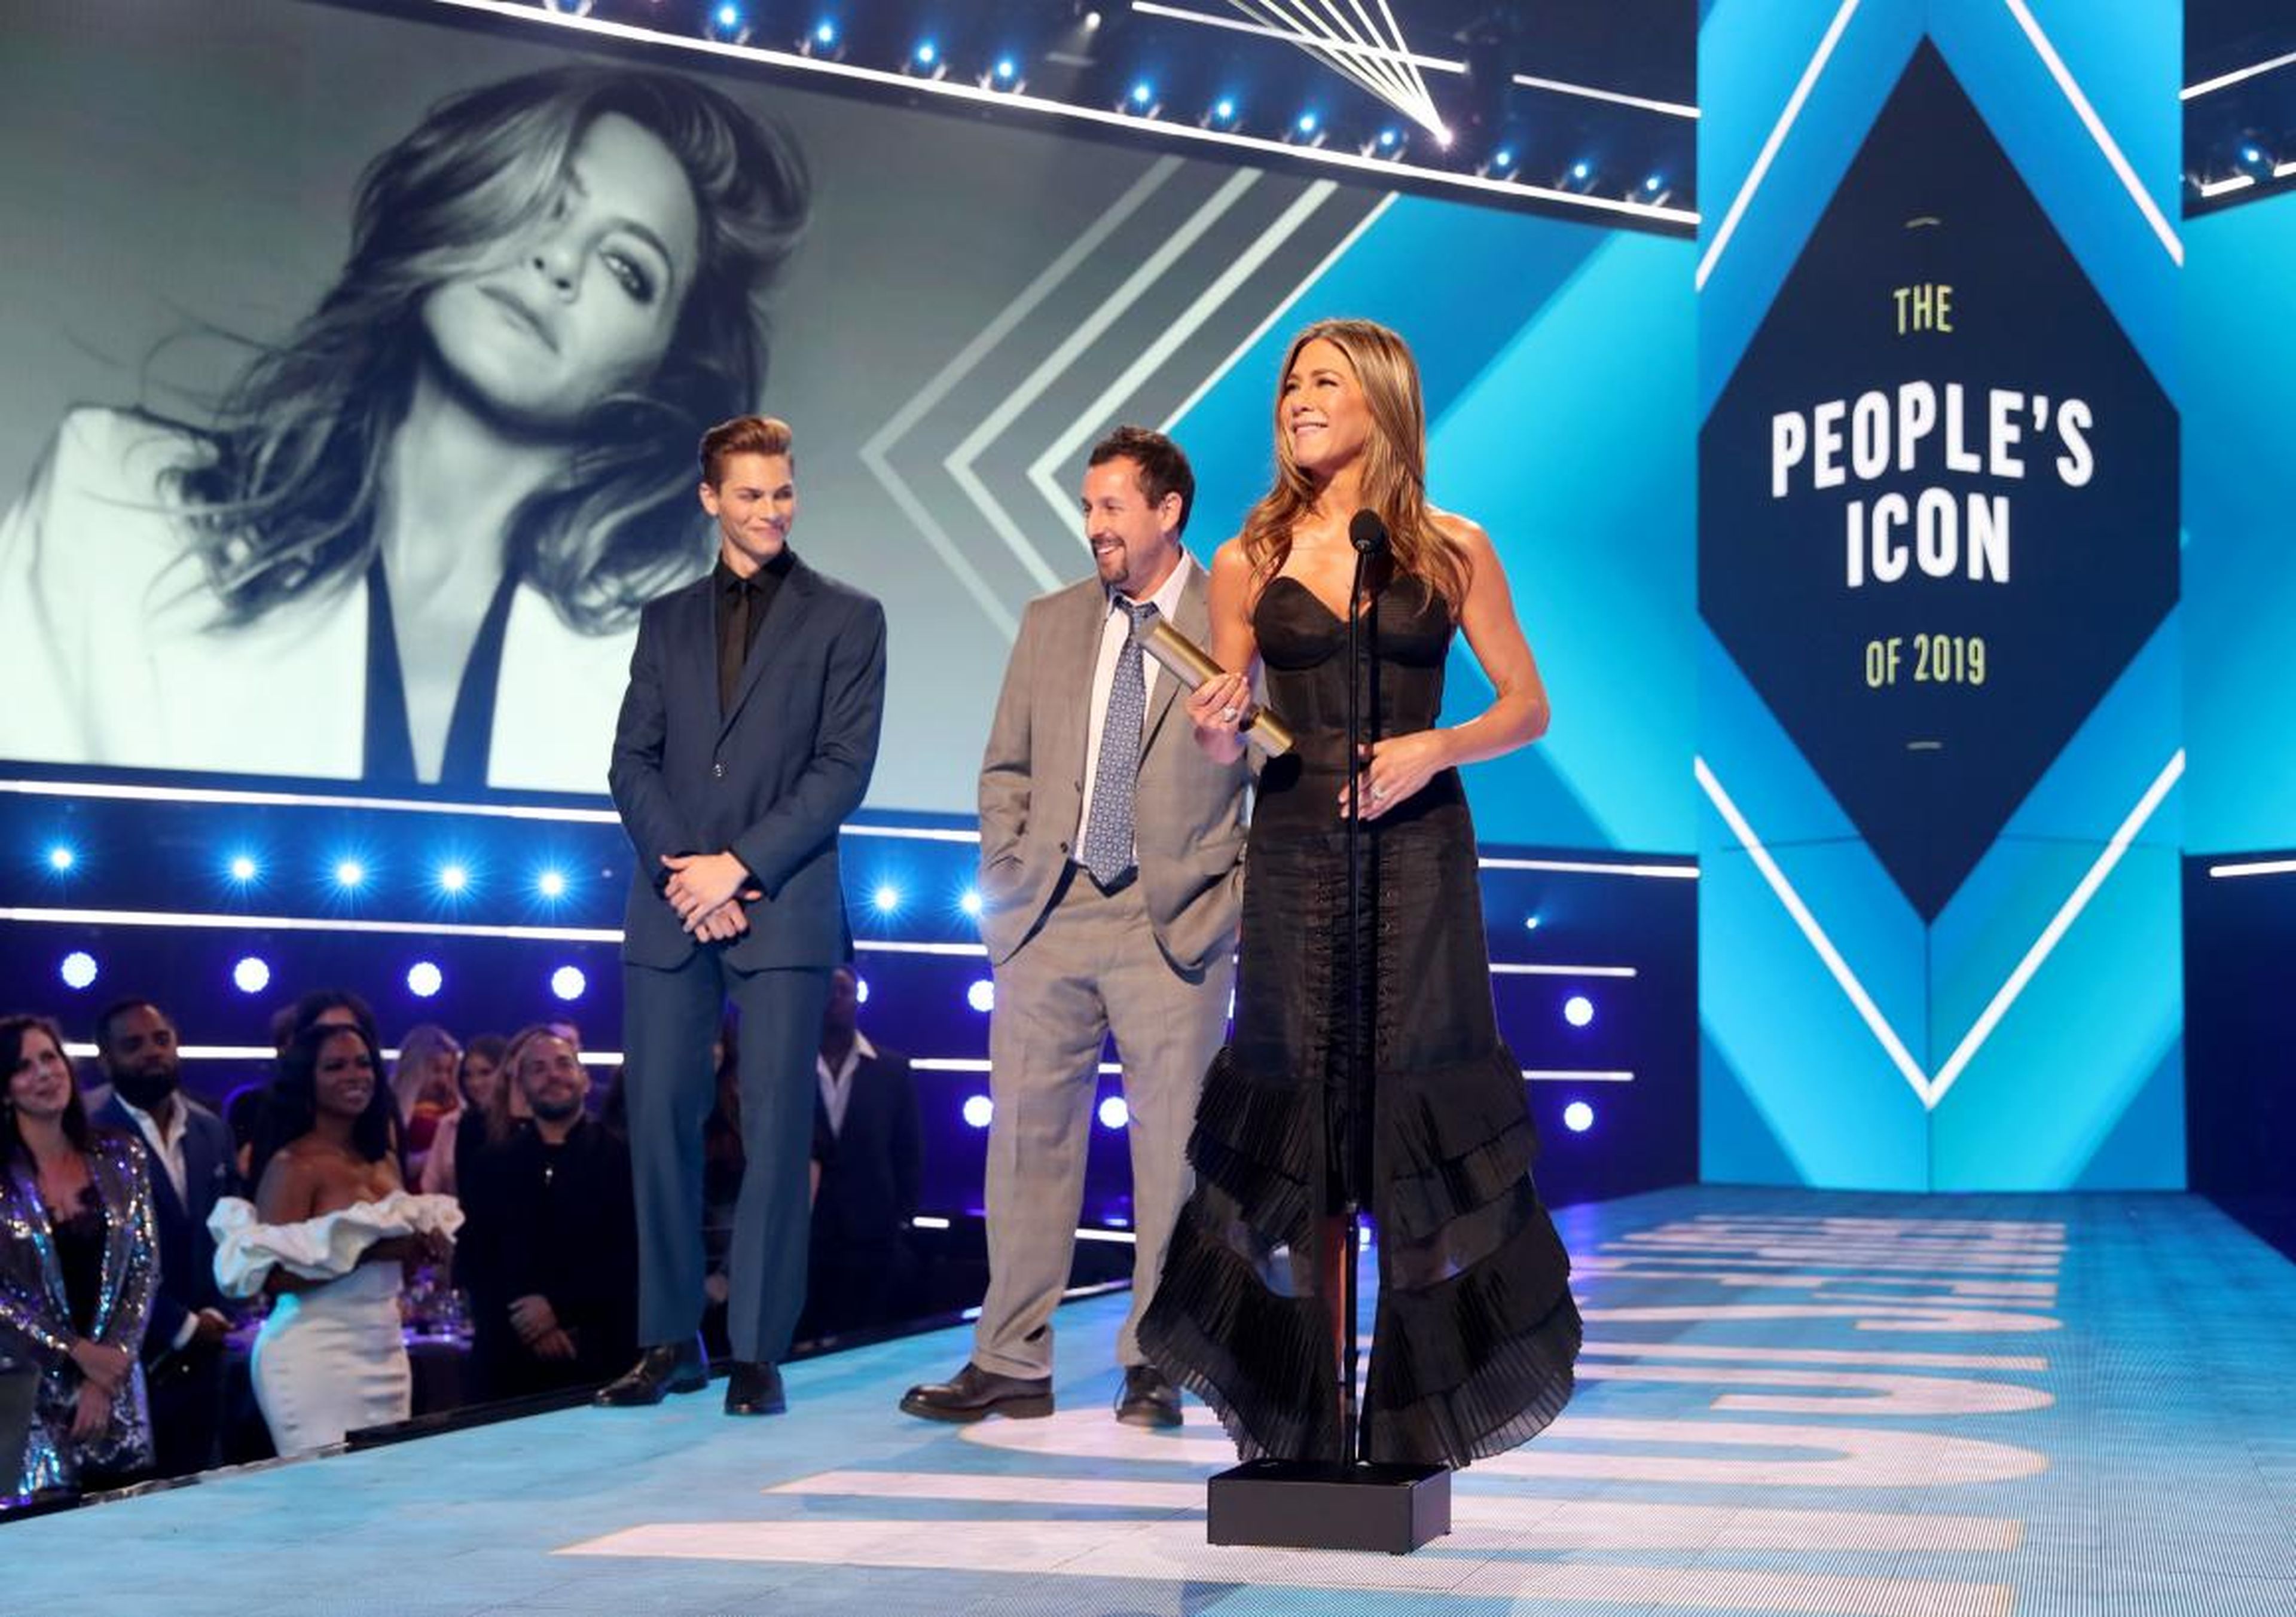 Jennifer Aniston won the People's Icon Award for her career achievements at the People's Choice Awards on November 10.